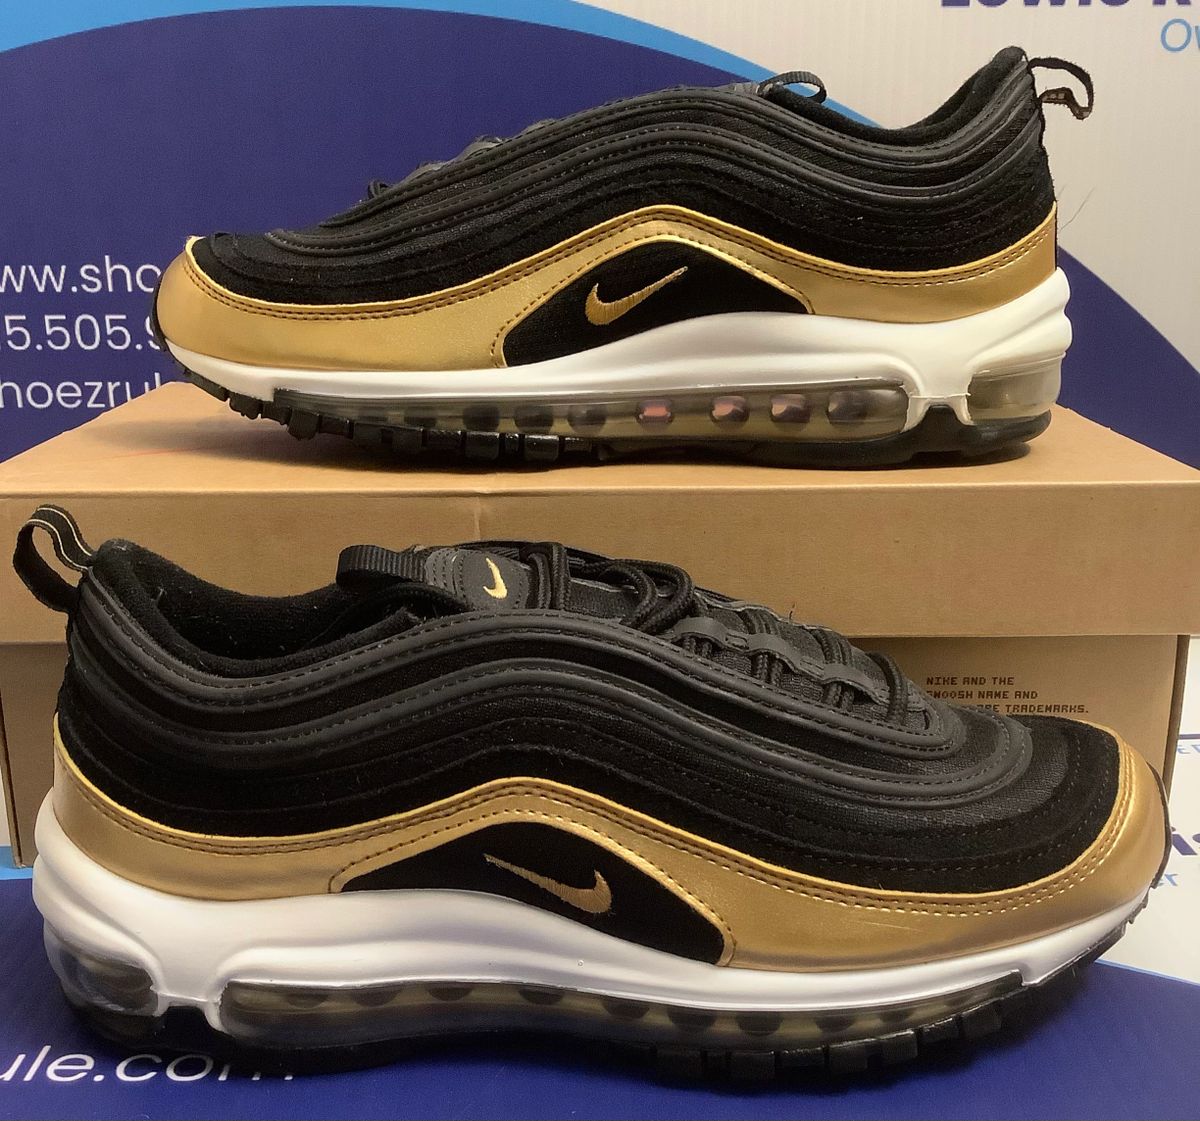 Reconditioned Nike “Air Max 97 Black Gold” Big Kids Size 6.5y